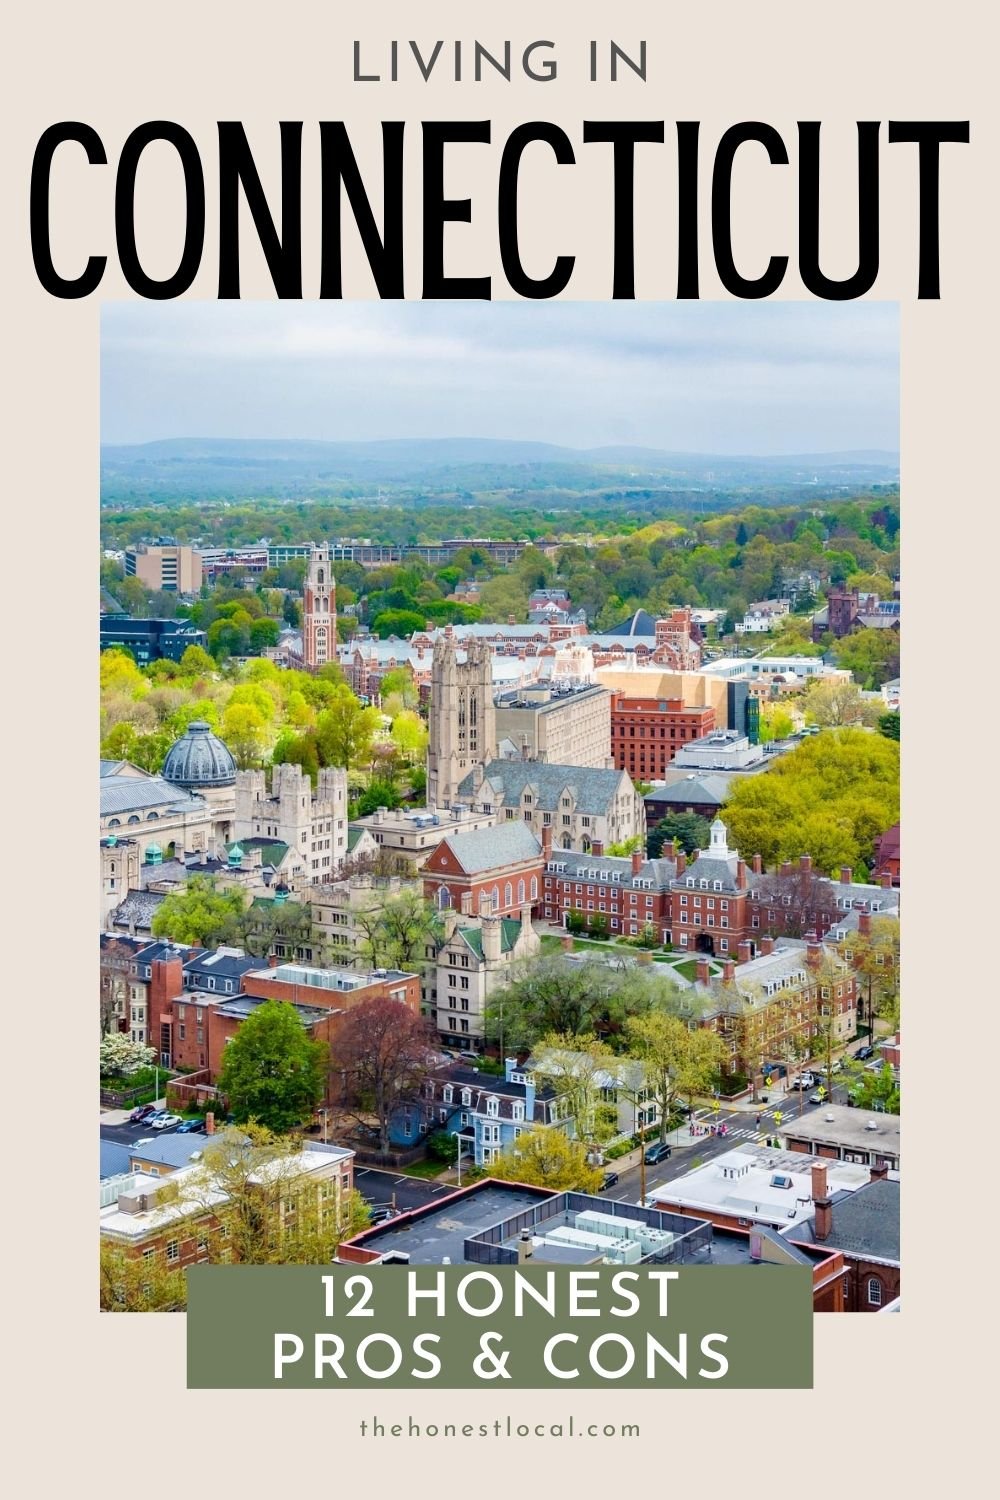 Pros and cons of moving to Connecticut